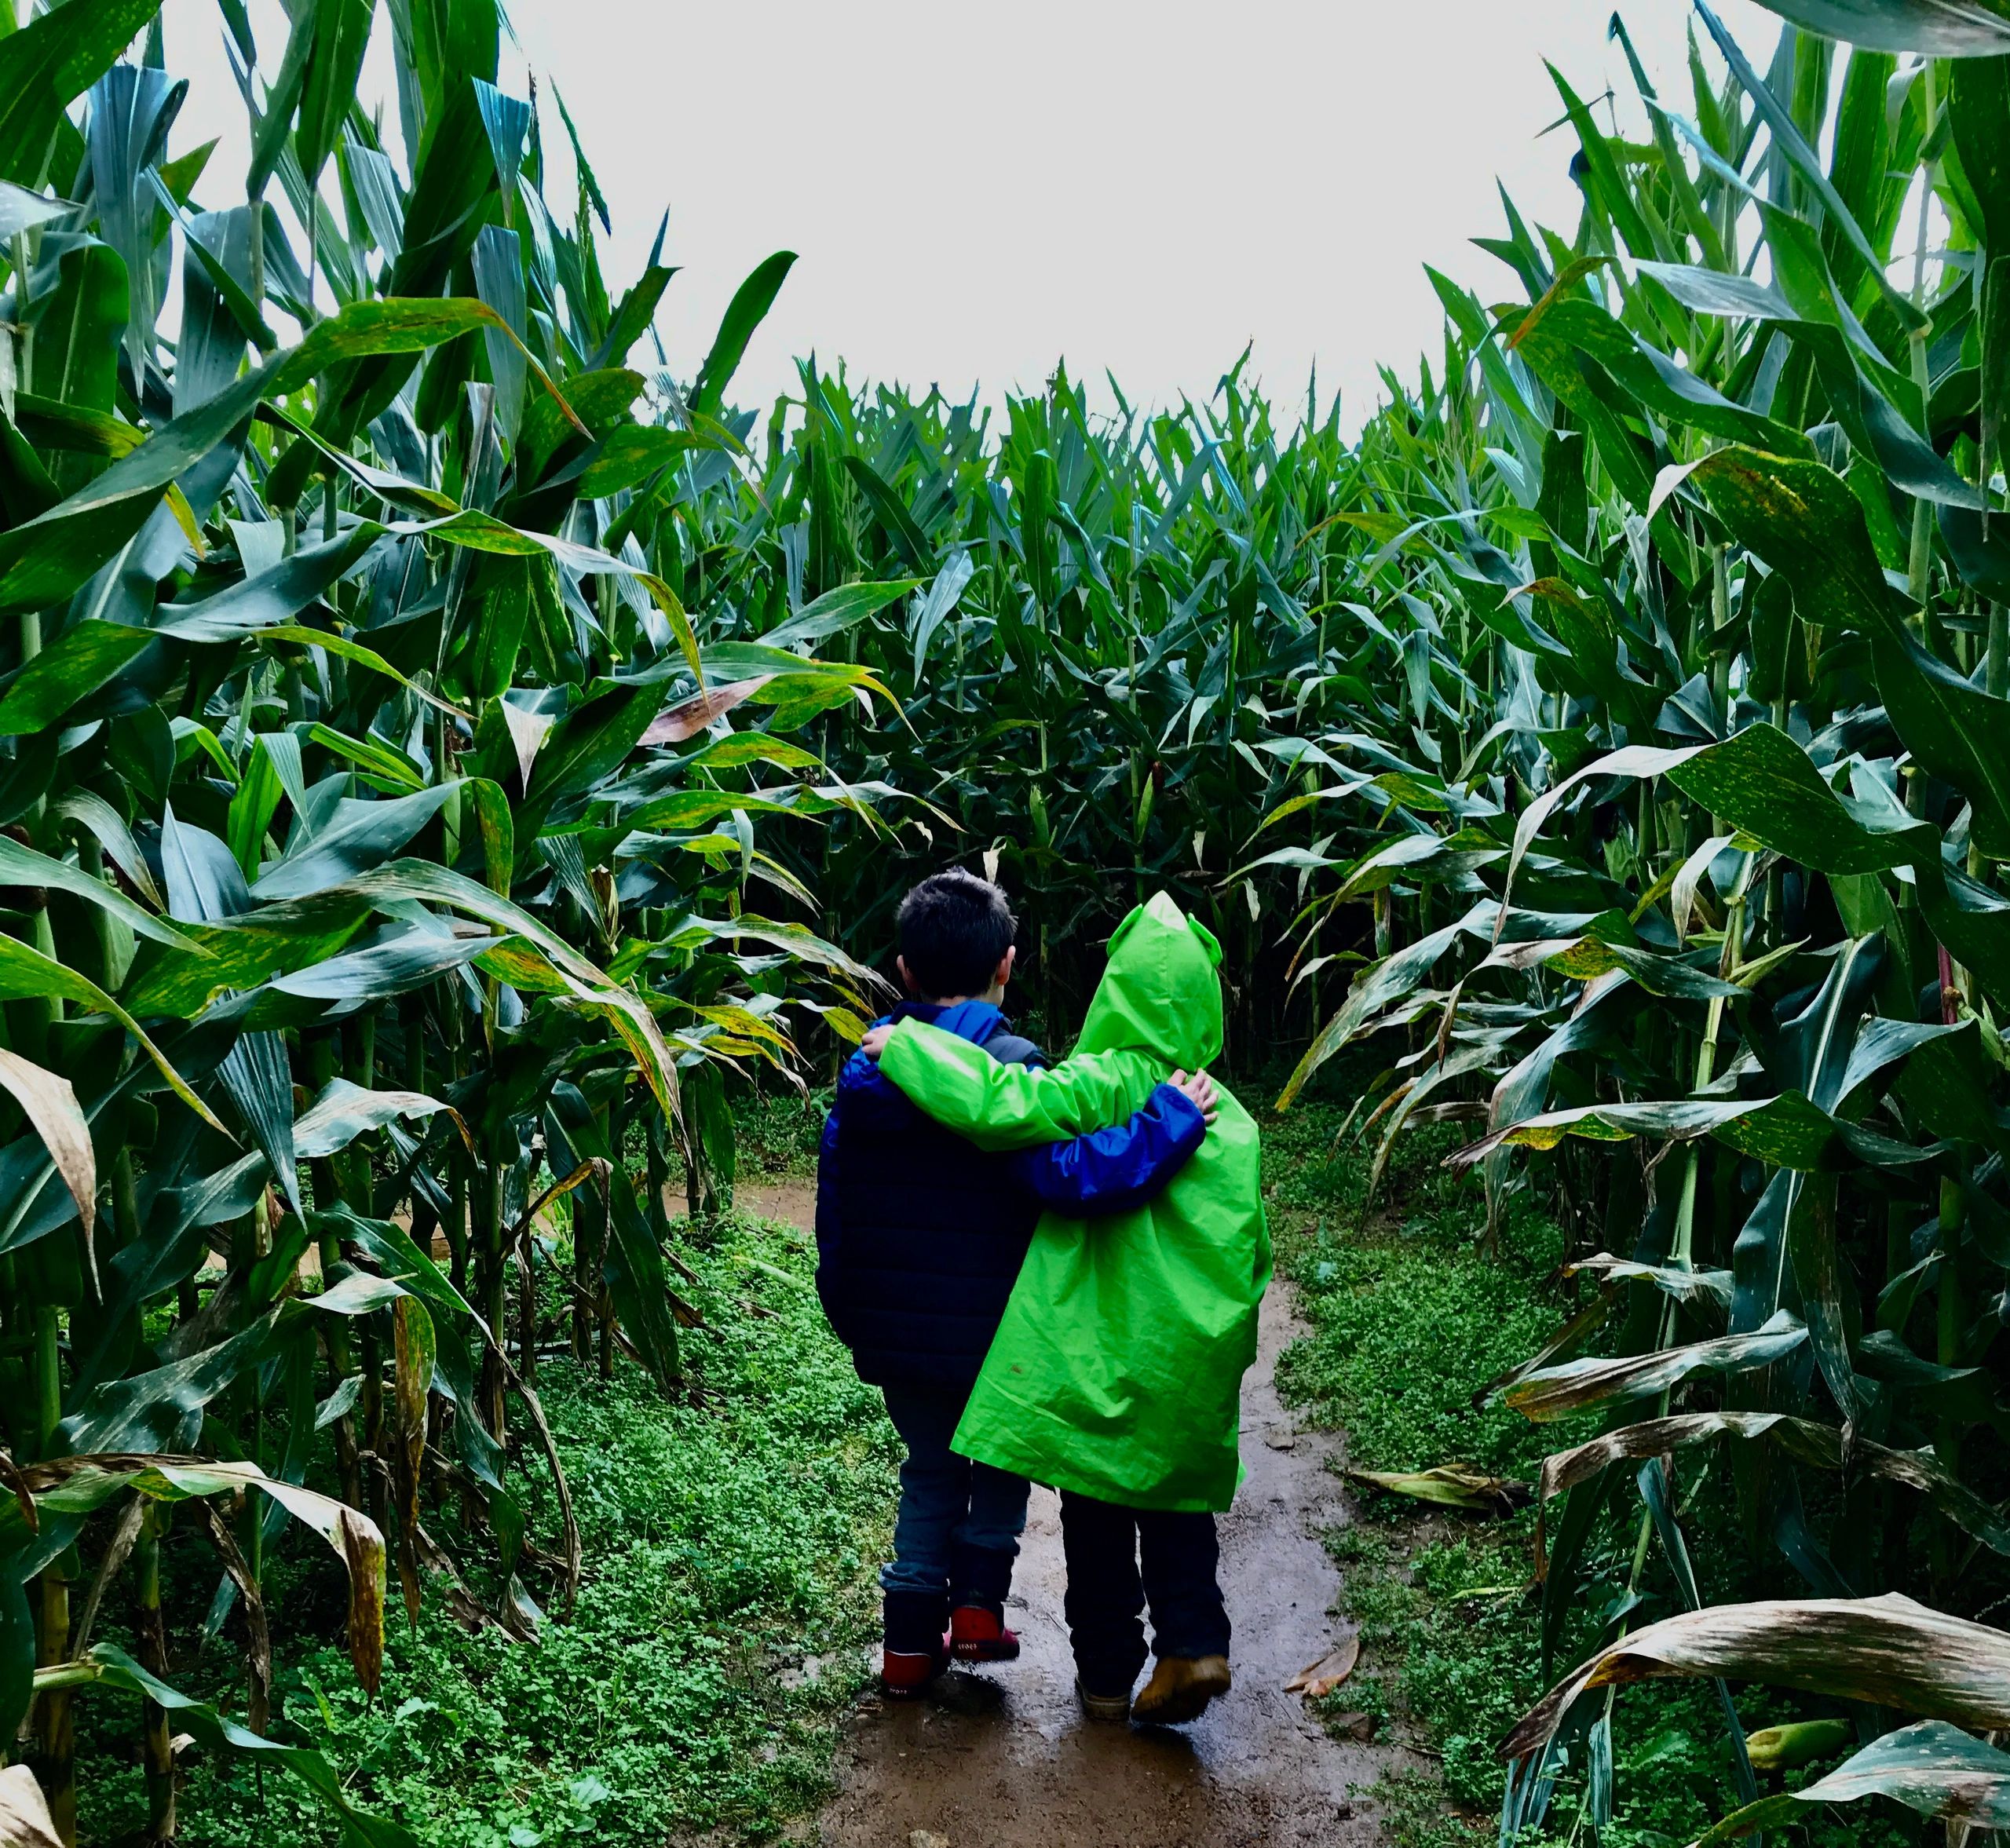 Boys walking arm in arm in a corn maze at Alstede Farms in New Jersey. Photo by Francesca Di Meglio